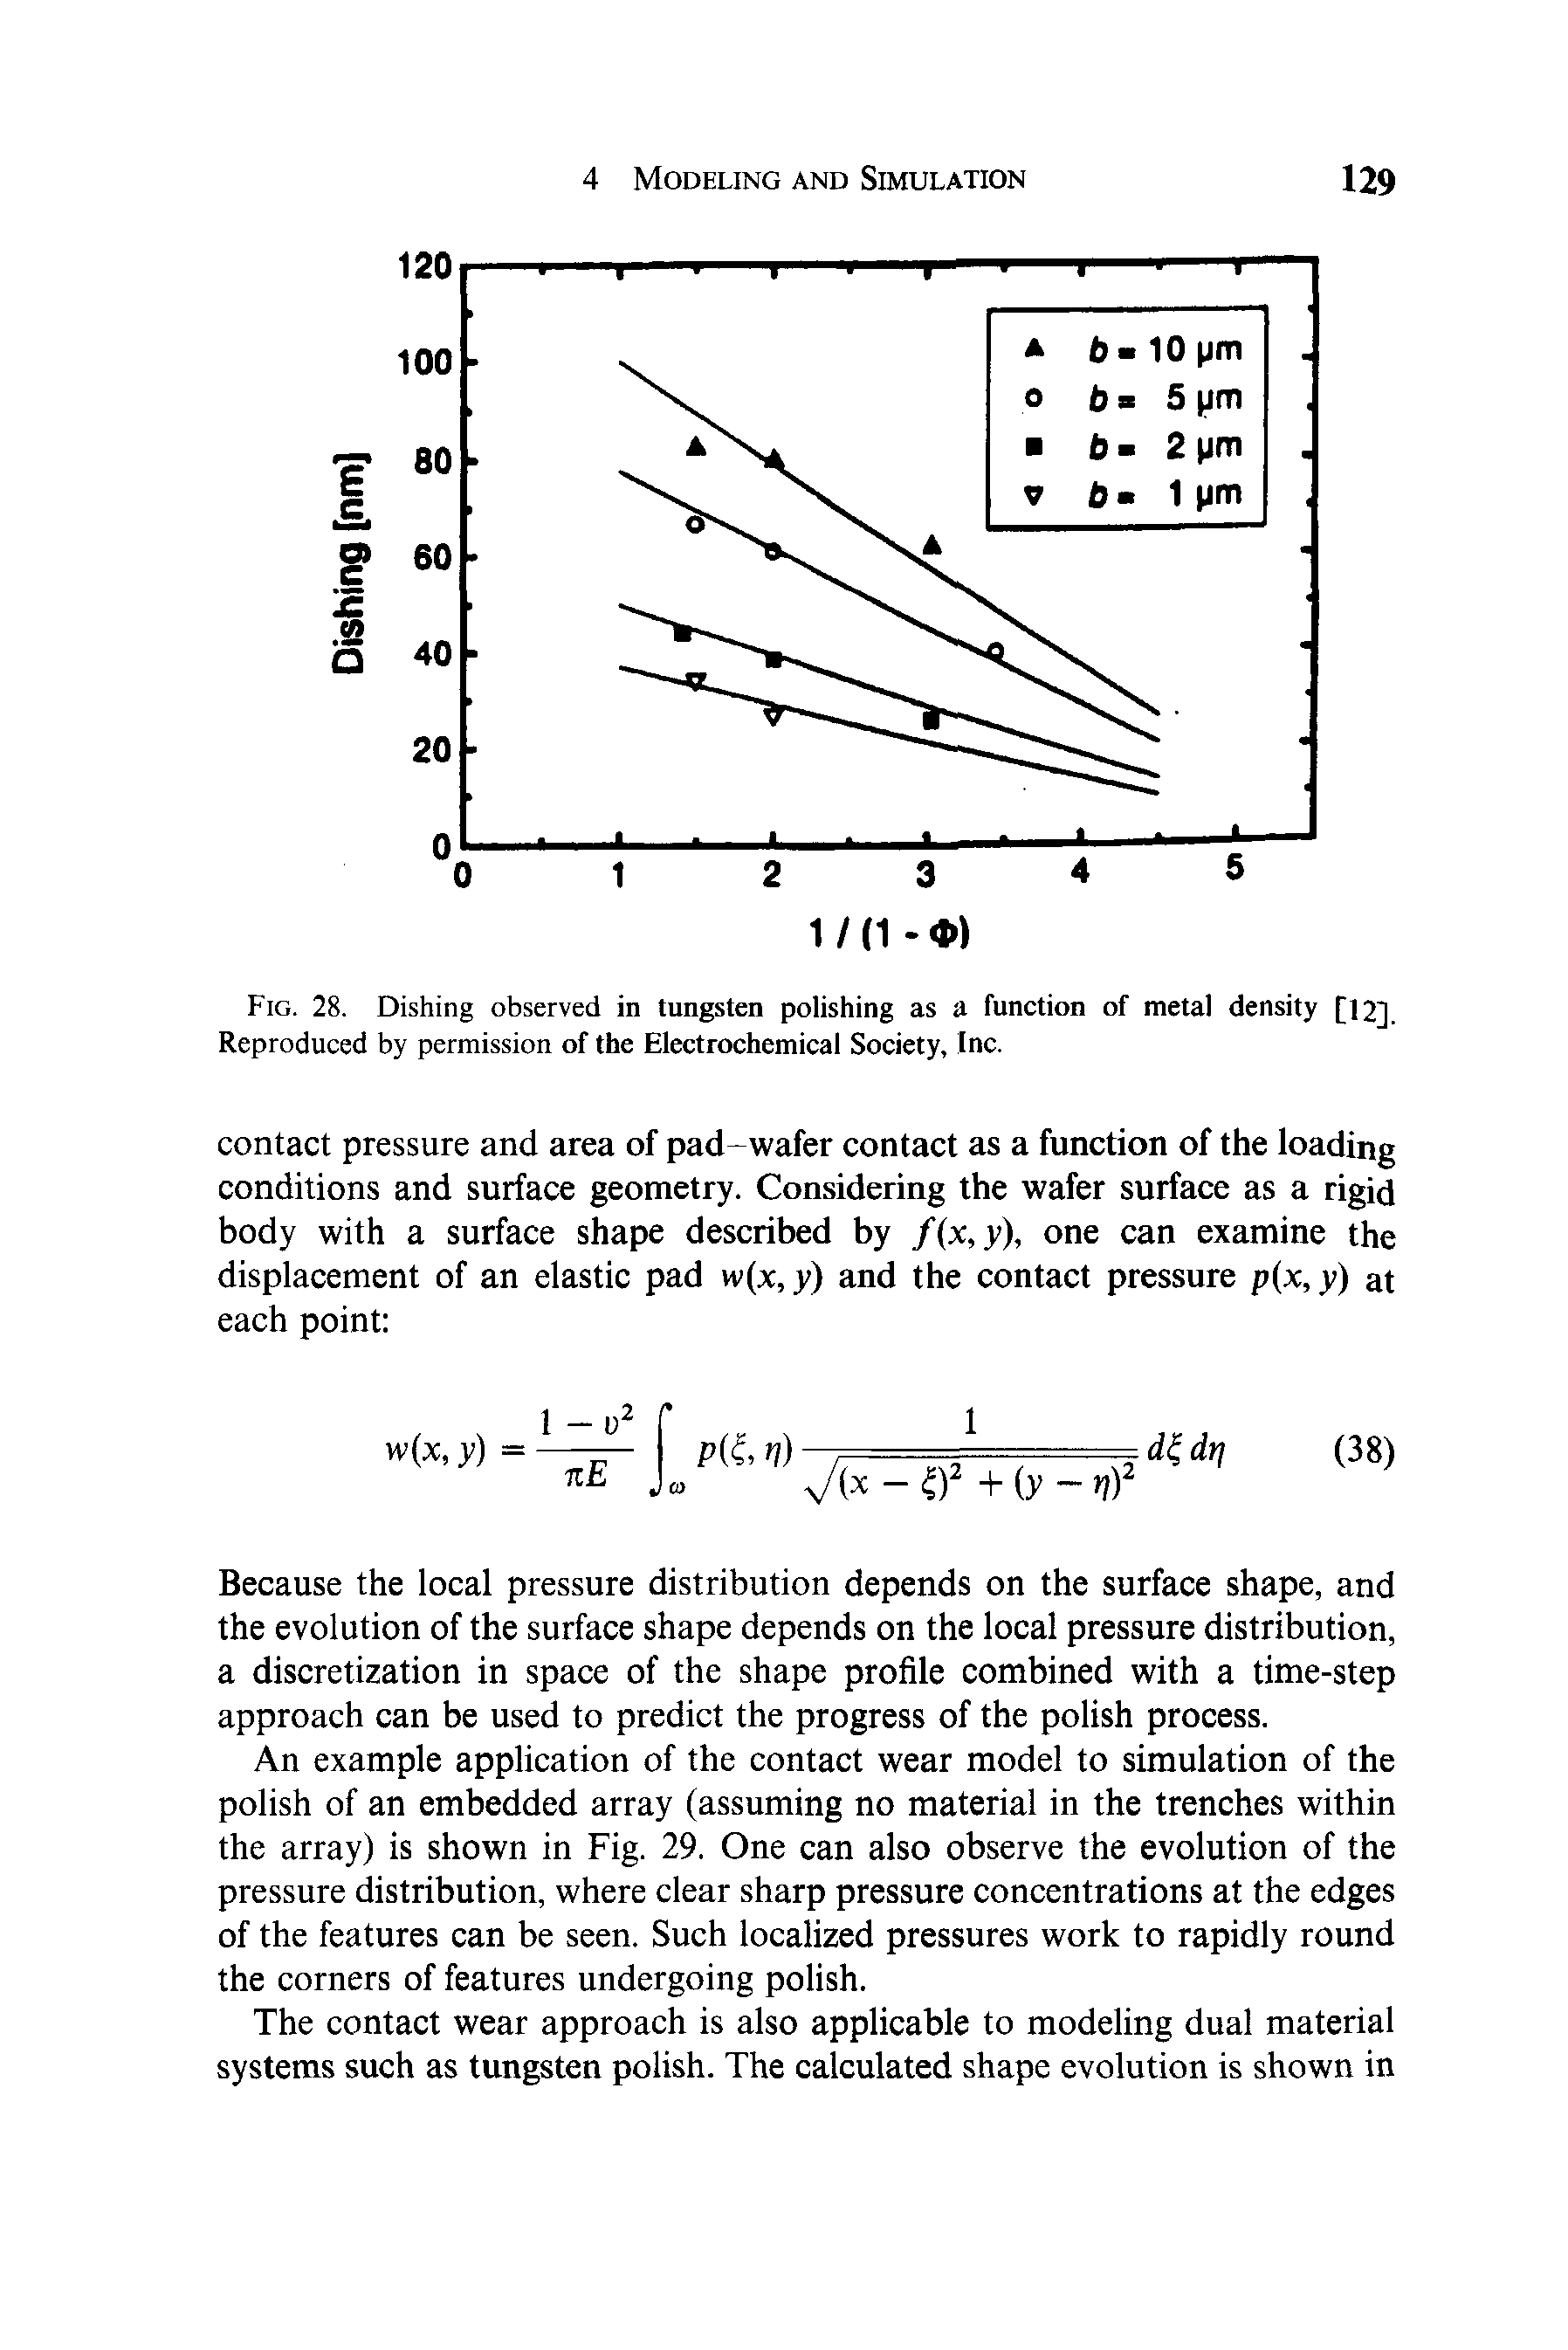 Fig. 28. Dishing observed in tungsten polishing as a function of metal density [12], Reproduced by permission of the Electrochemical Society, Inc.